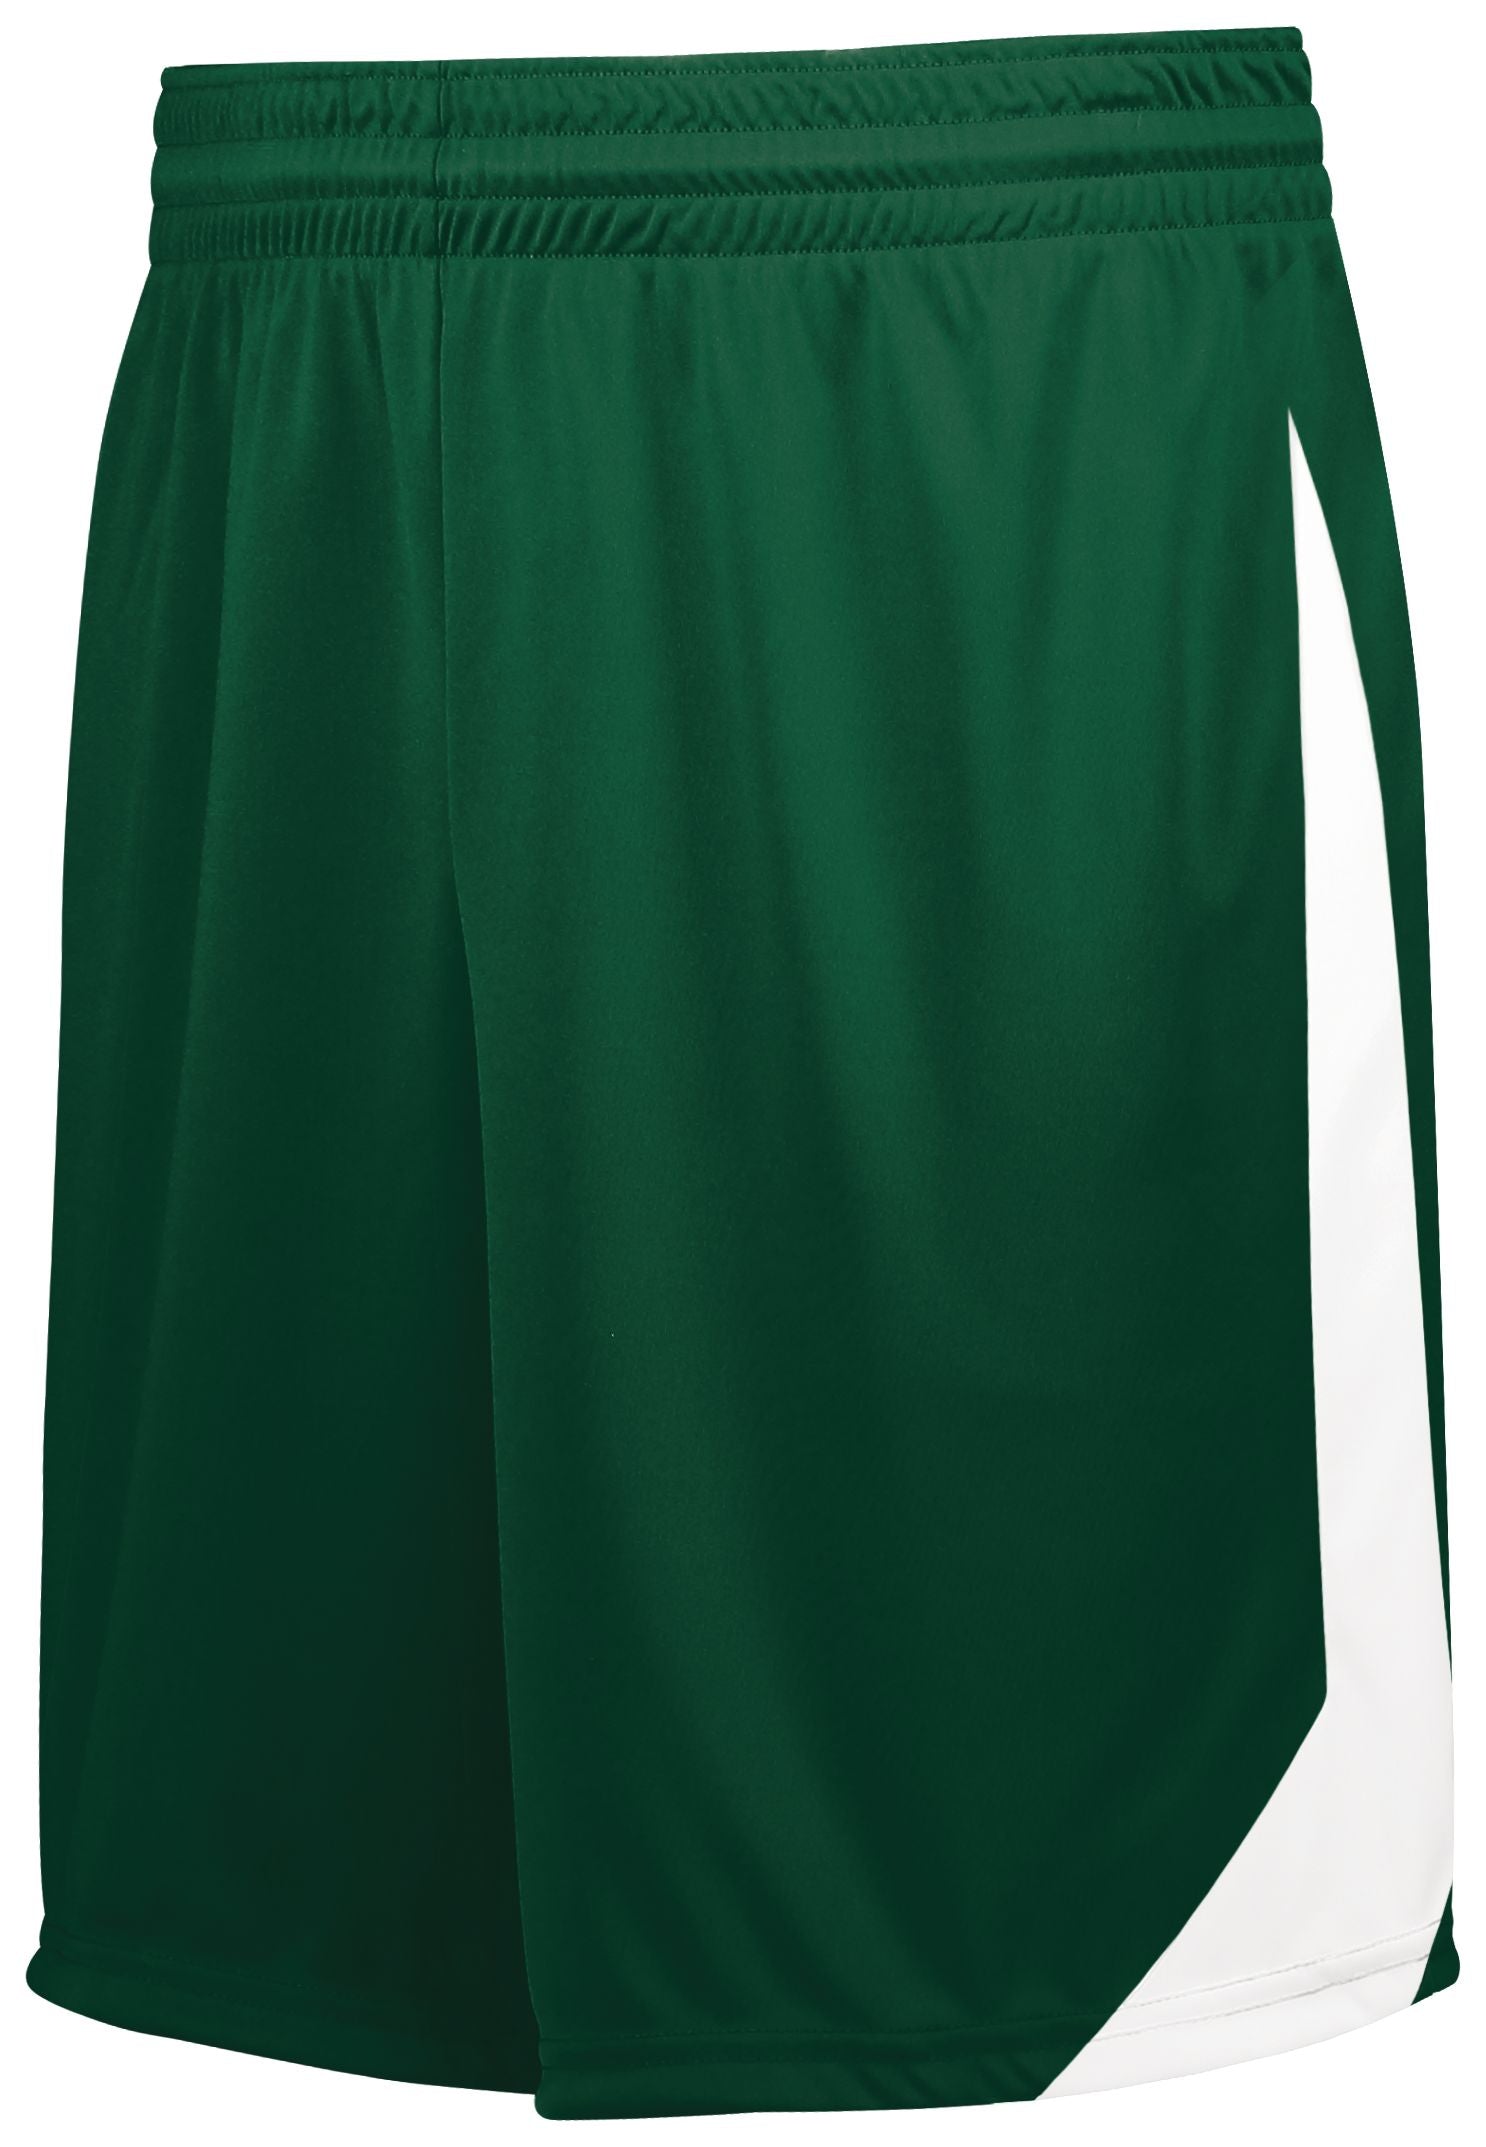 High 5 Youth Athletico Shorts in Dark Green/White  -Part of the Youth, Youth-Shorts, High5-Products, Soccer, All-Sports-1 product lines at KanaleyCreations.com